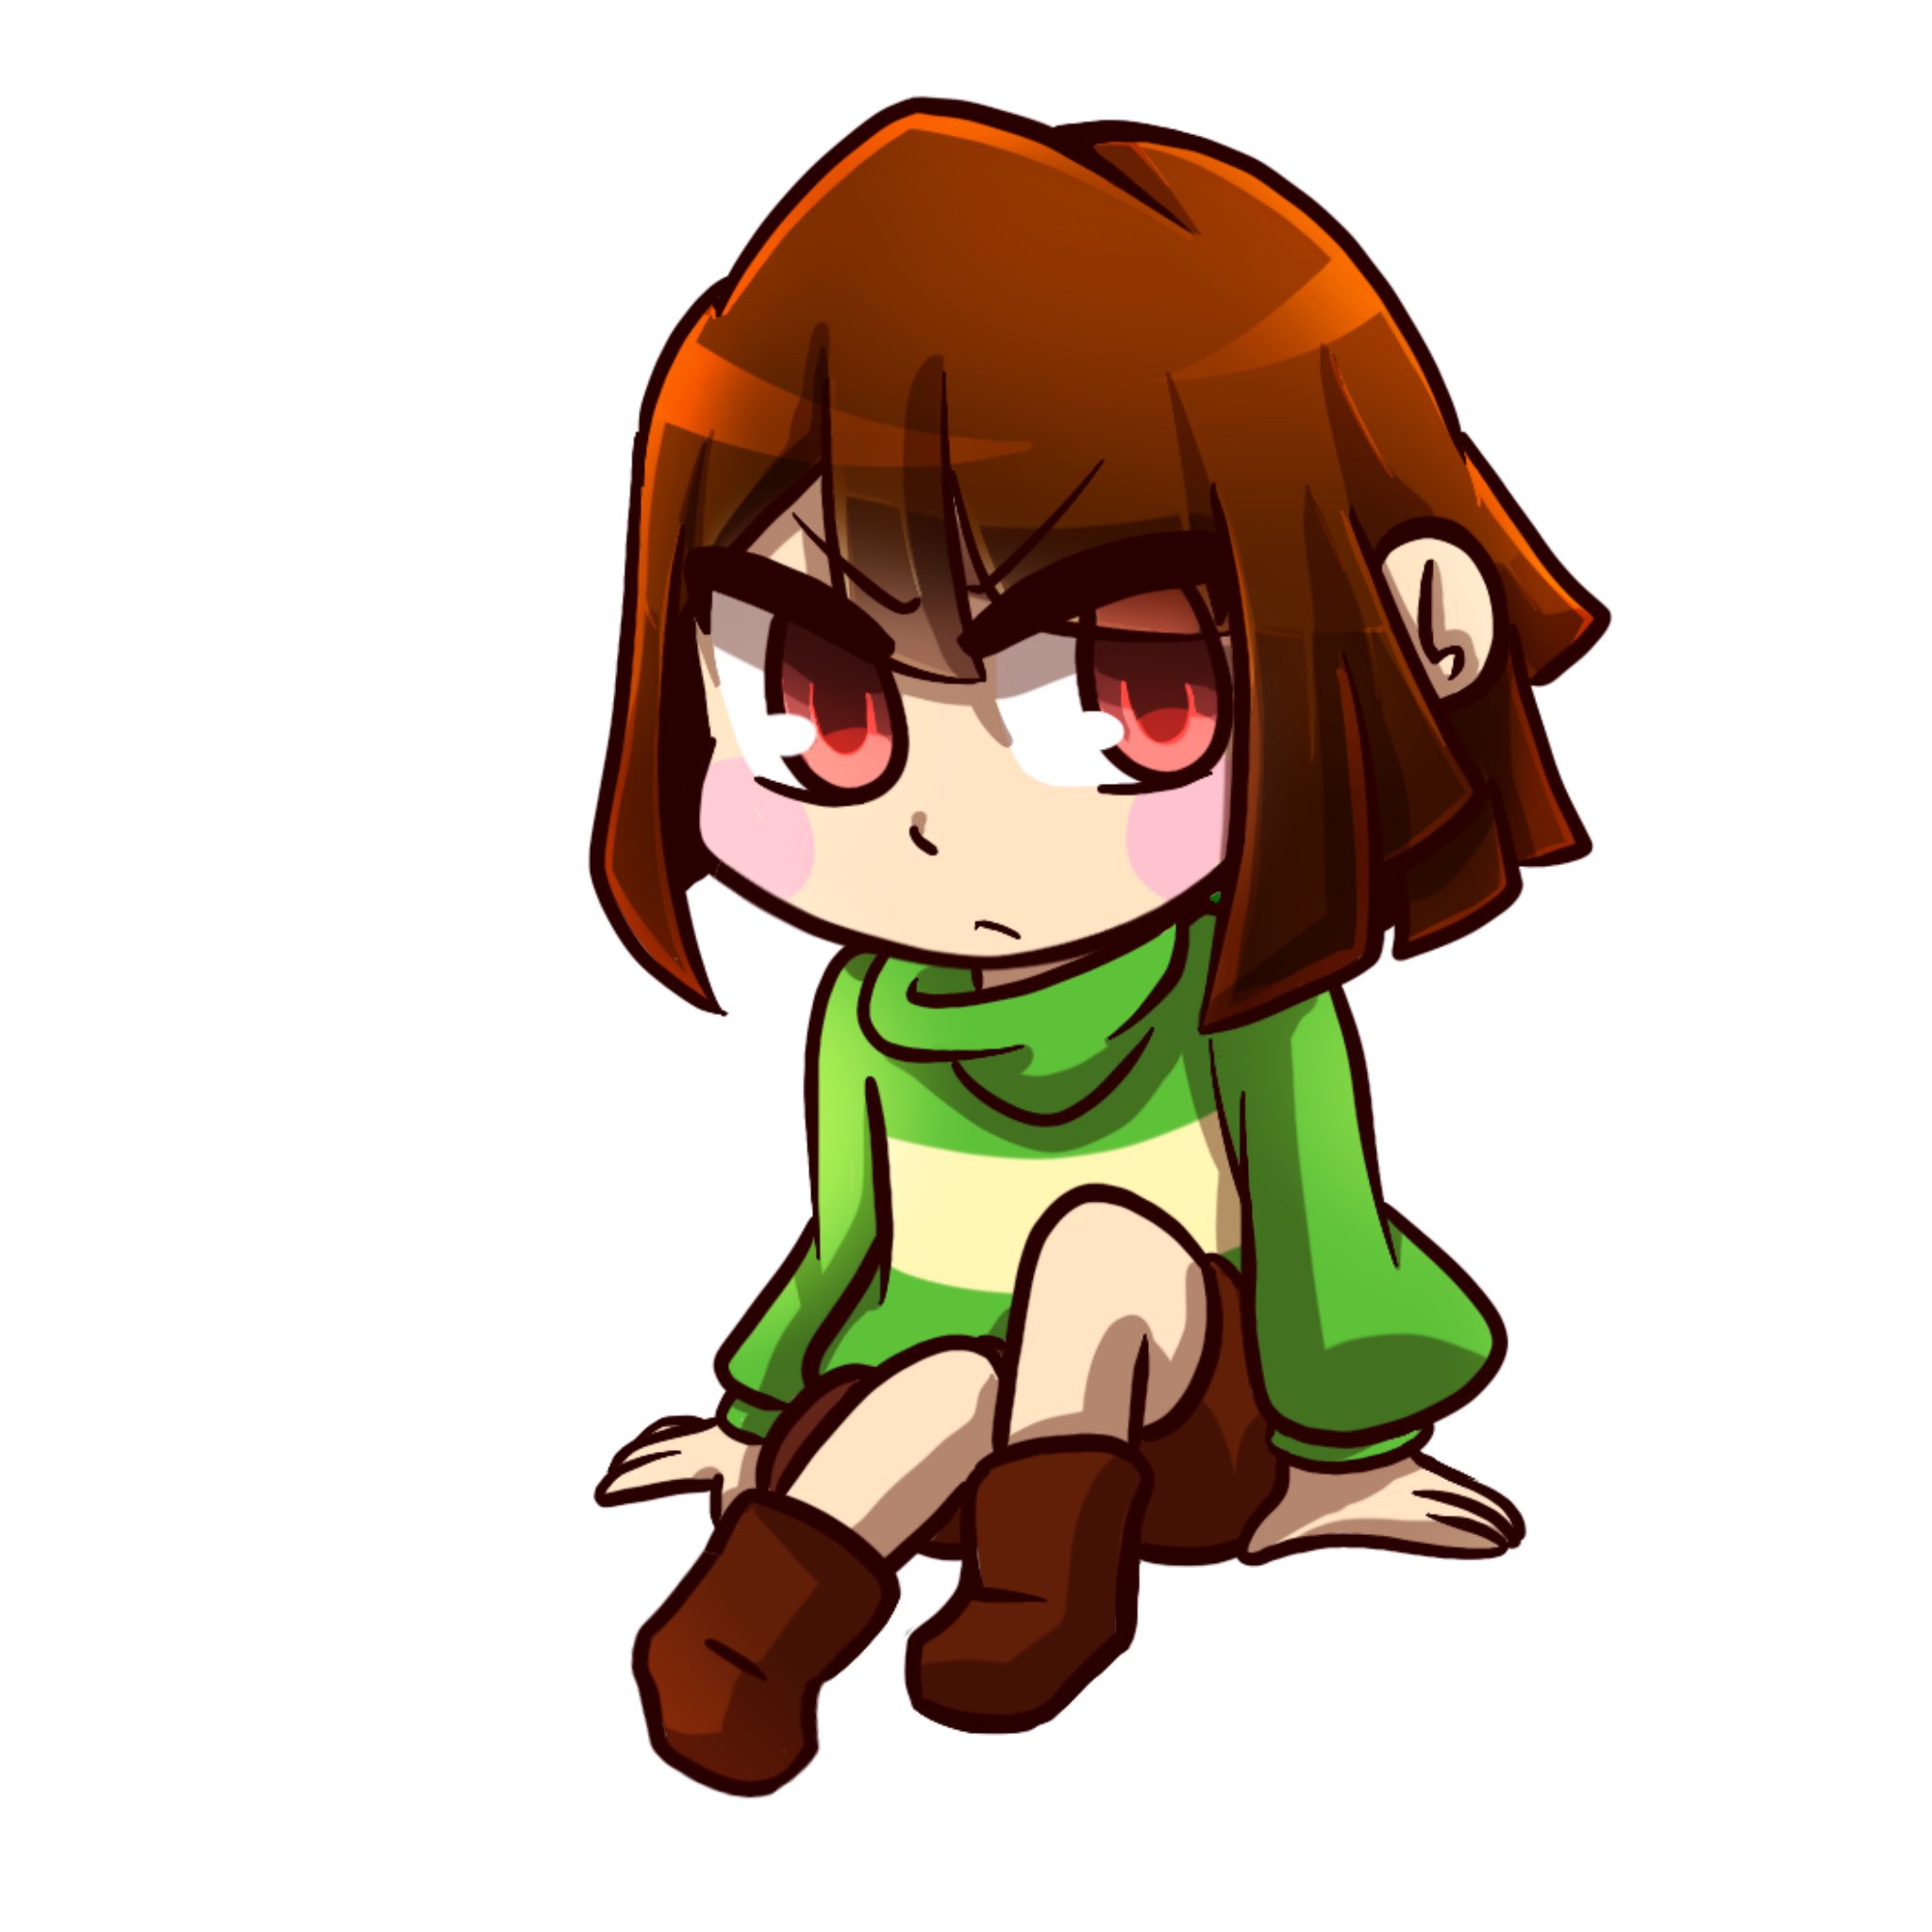 Digital art of chara from undertale with a knife